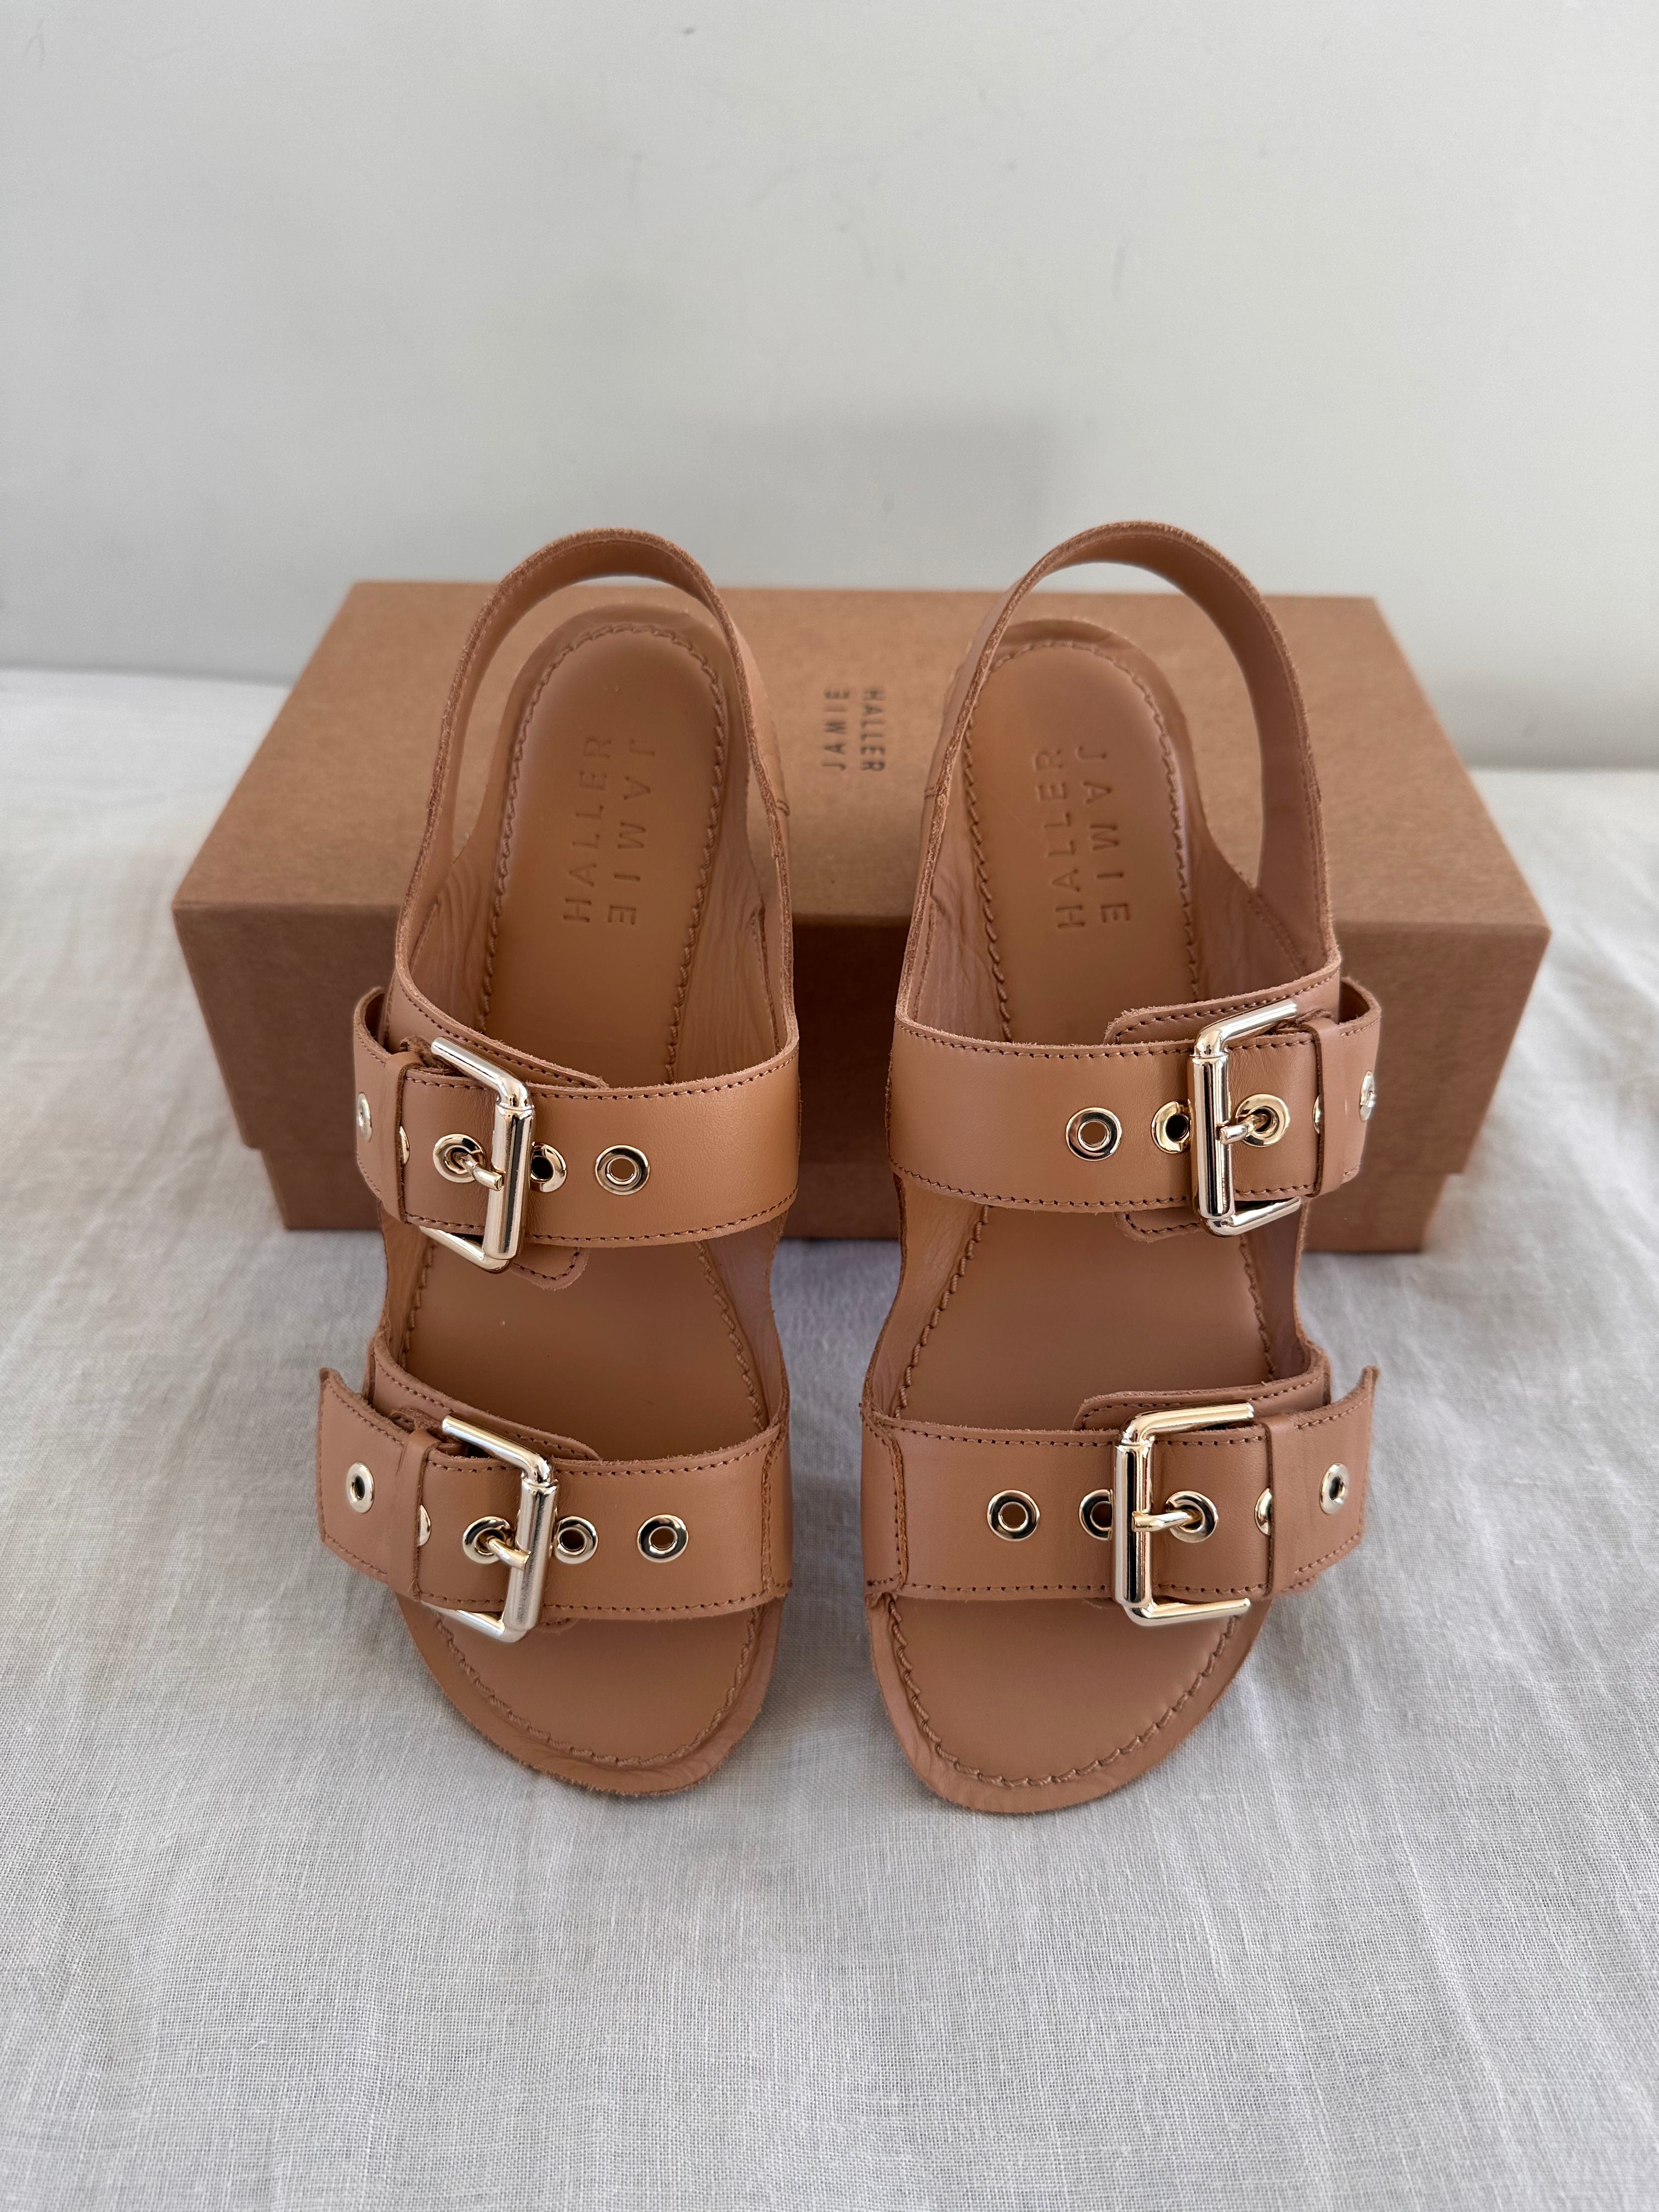 The Double Buckle Sandal in Bare on Bed Angled Down